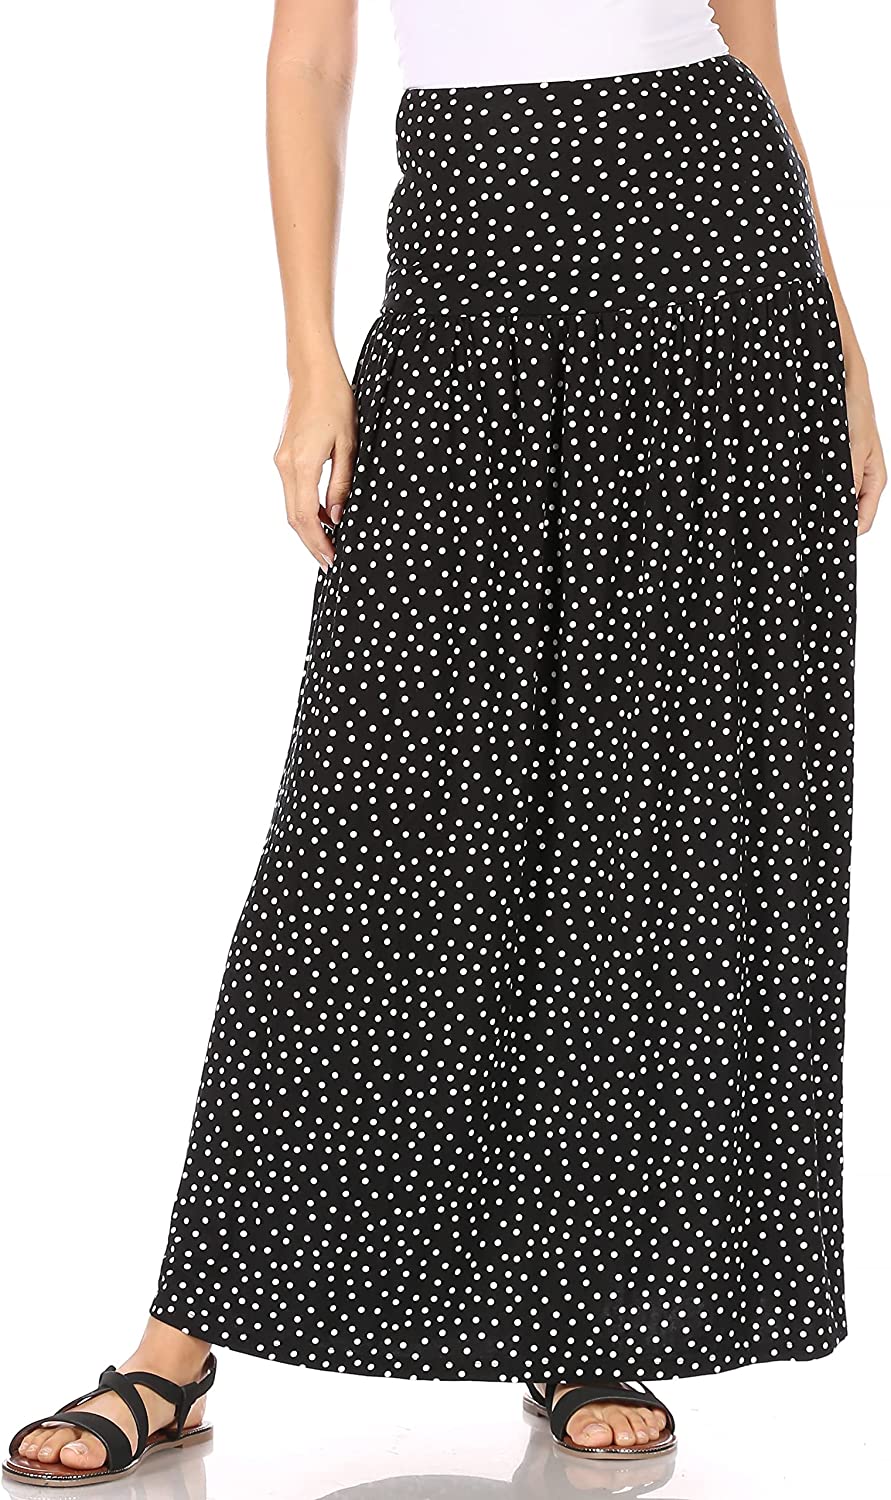 Simlu Womens Long Maxi Skirt with Pockets Reg and Plus Size